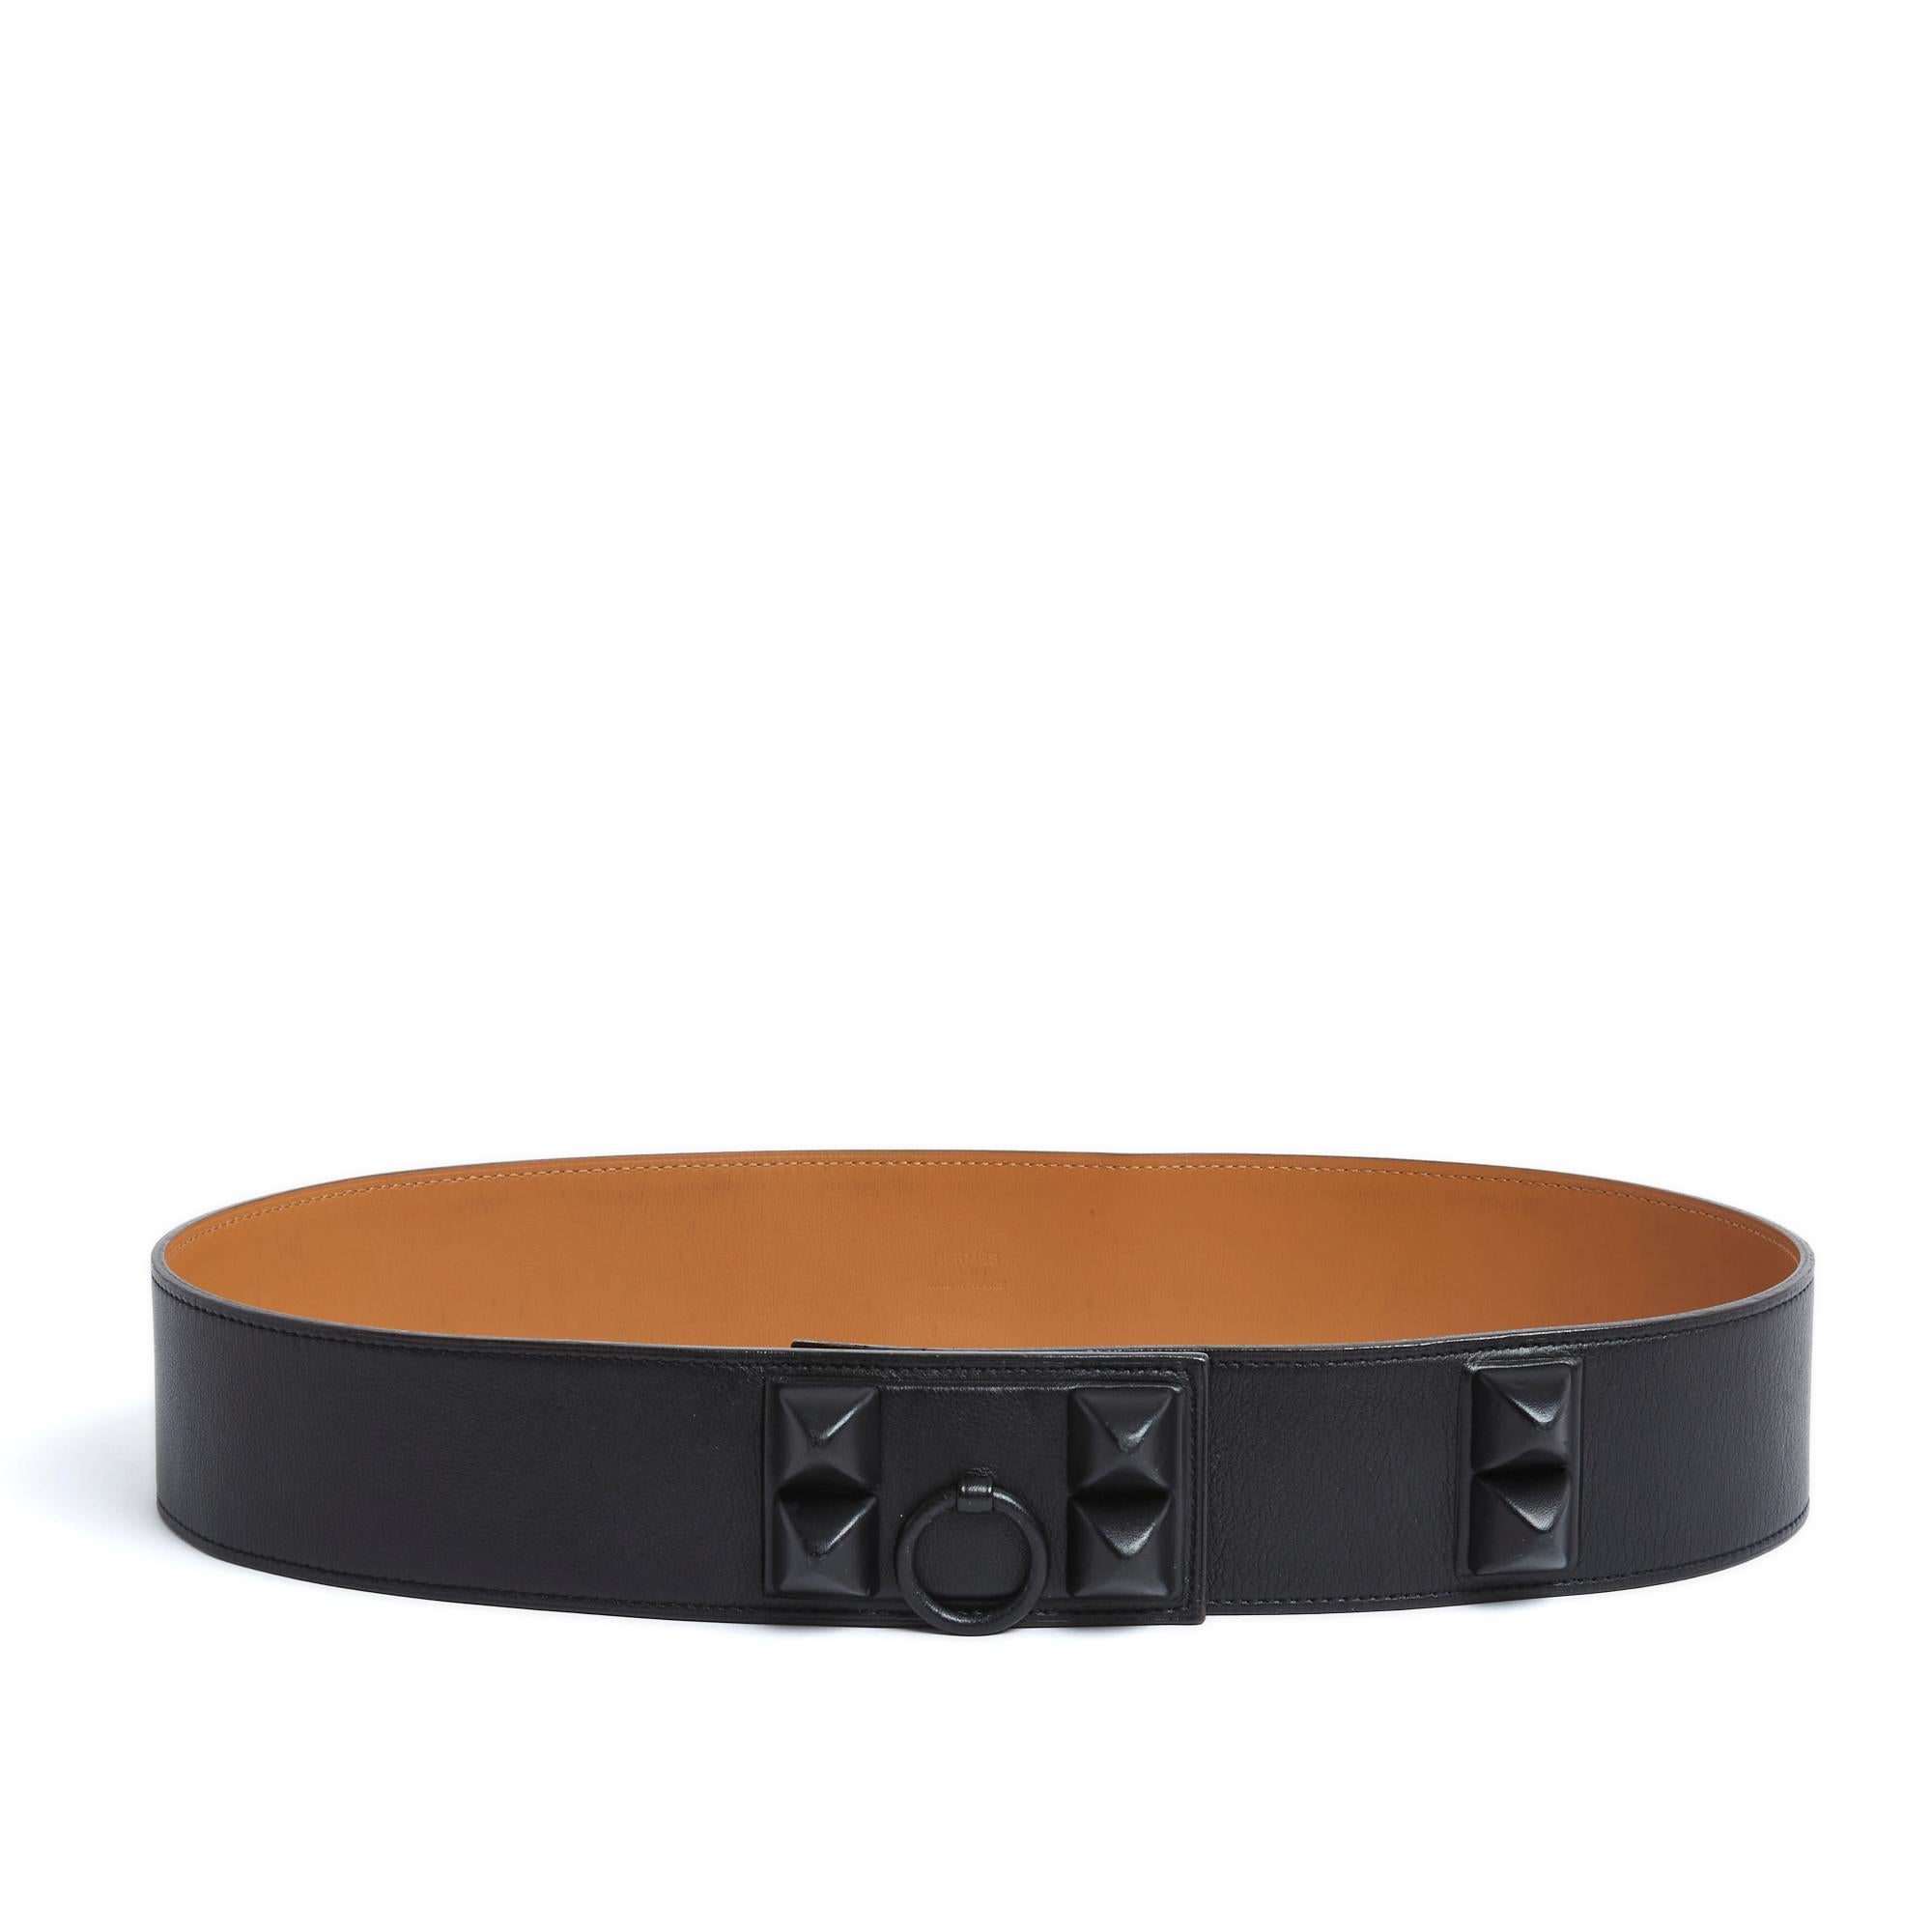 Hermès belt, Collier de Chien or Médor model, Shadow version (by Jean-Paul Gaultier) in black swift leather and gold chamonix calfskin, leather-covered metalwork, 2-notch closure, year 2009. Size 85, total length 92 cm, width 5 cm . The belt shows